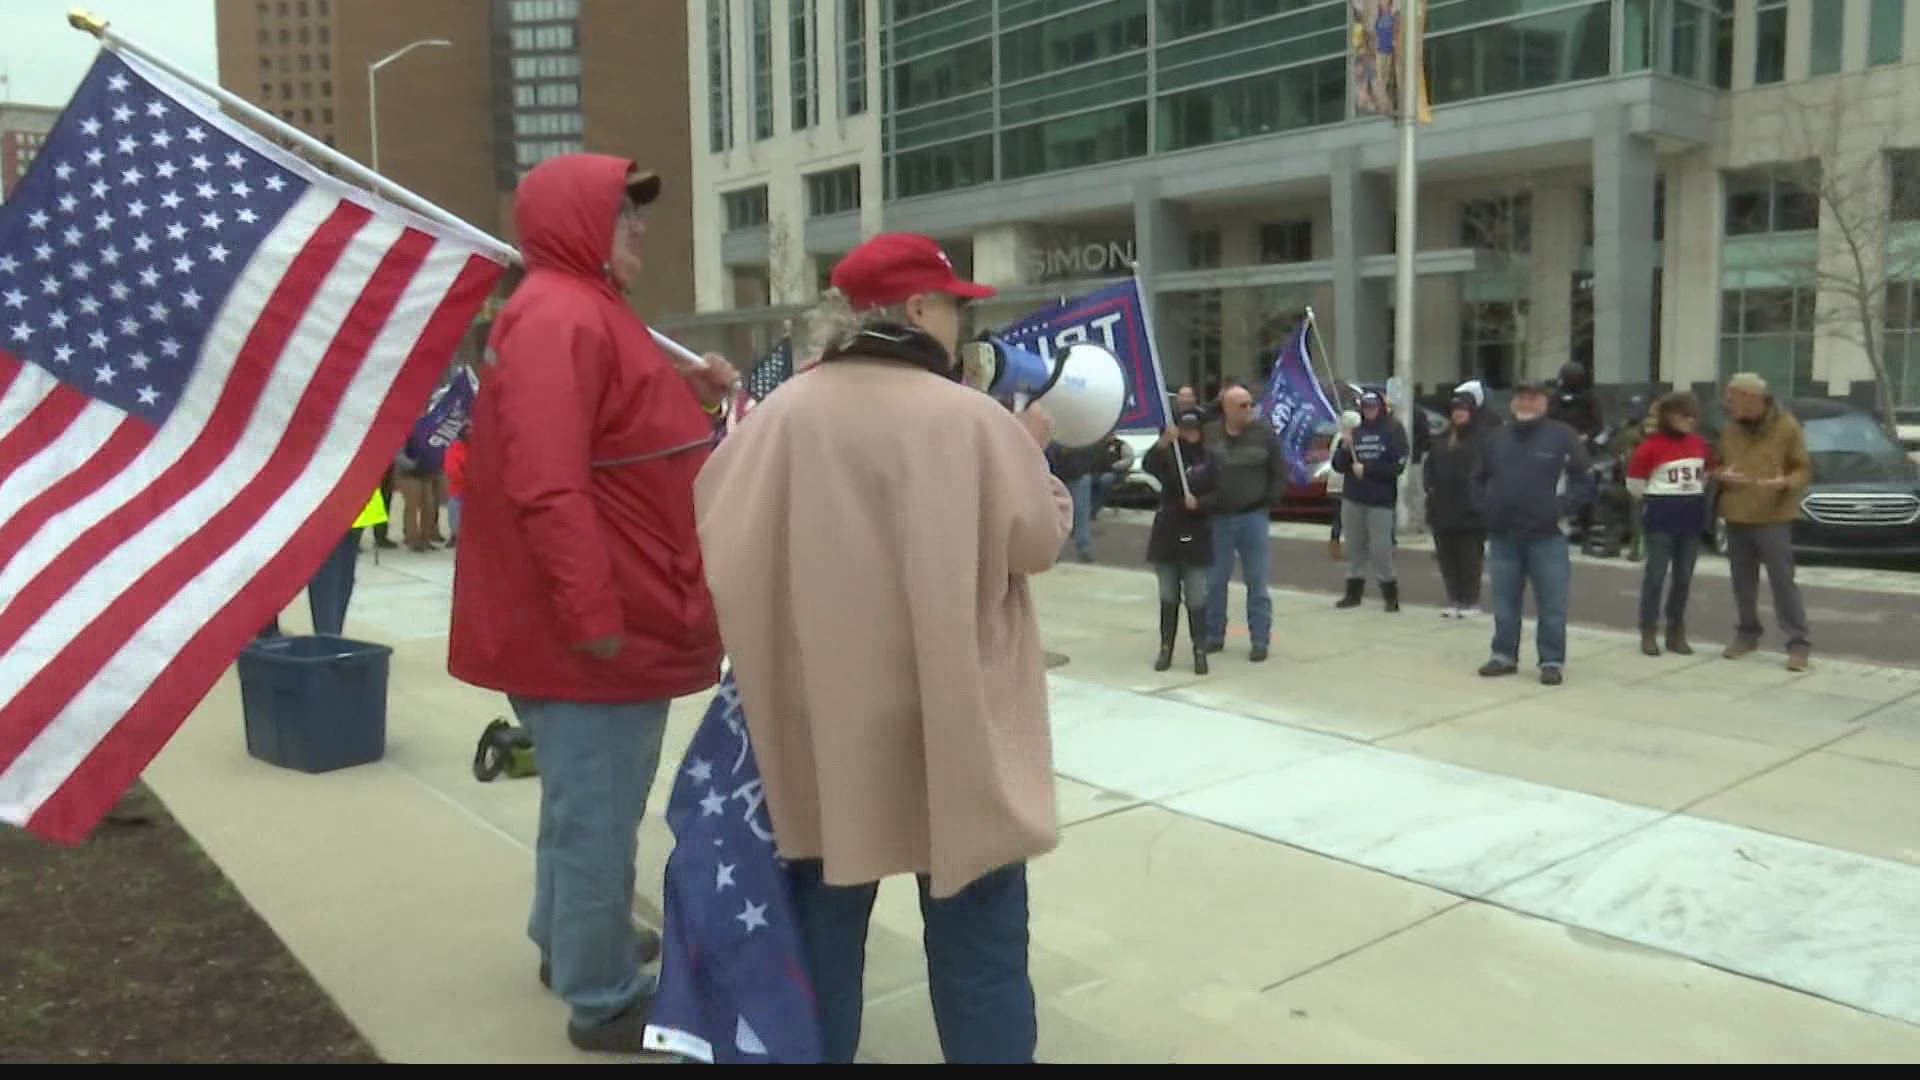 More than 100 President Trump supporters gathered at the Indiana statehouse for a noon rally Saturday.